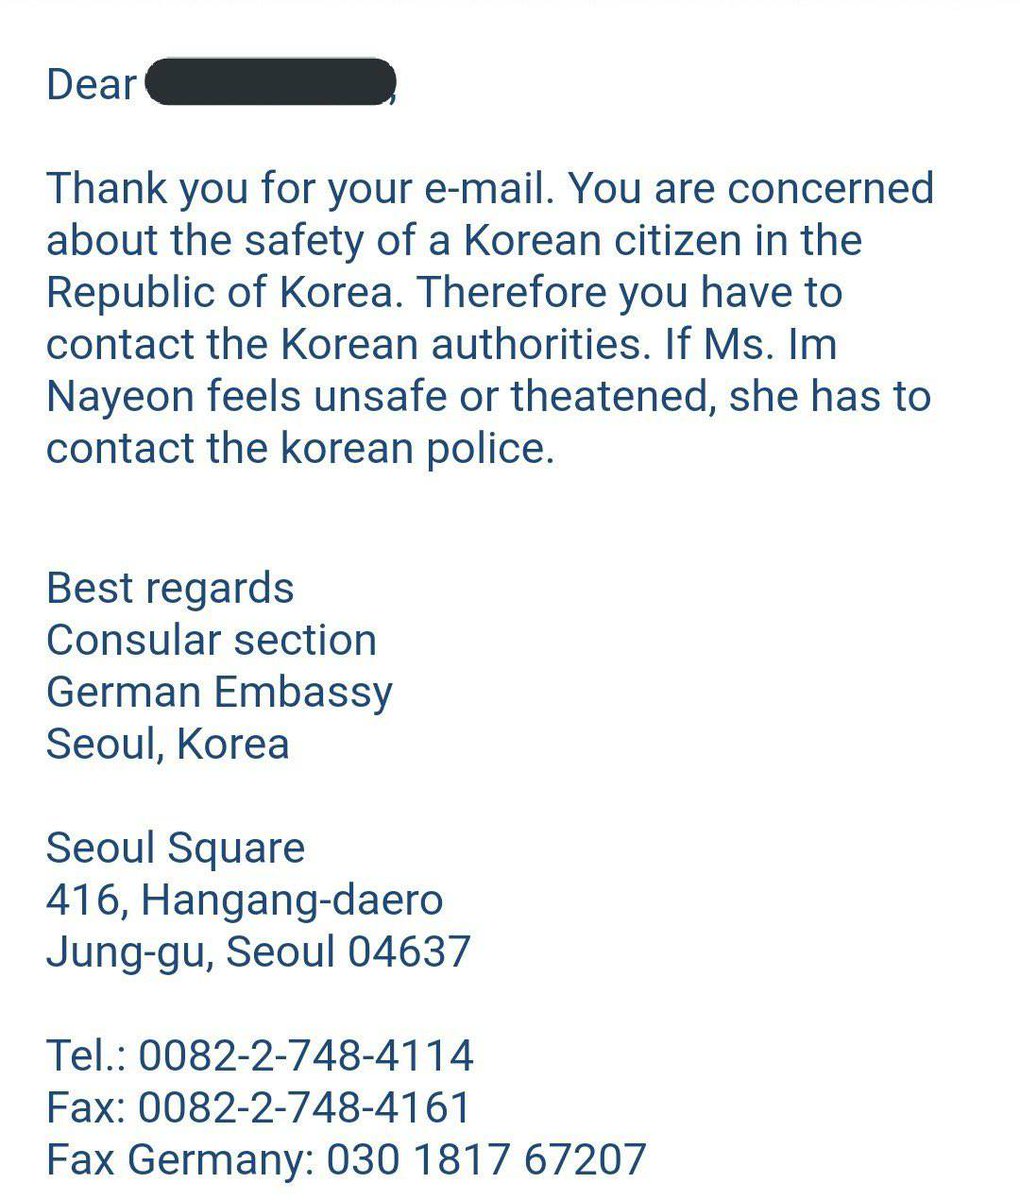 Tzudeng Some Once Emailed German Embassy About The Stalker Got This Reply But I Don T Care I Ll Continue To Germanyinkorea The Perpetrator Is A German An Embarrassment To